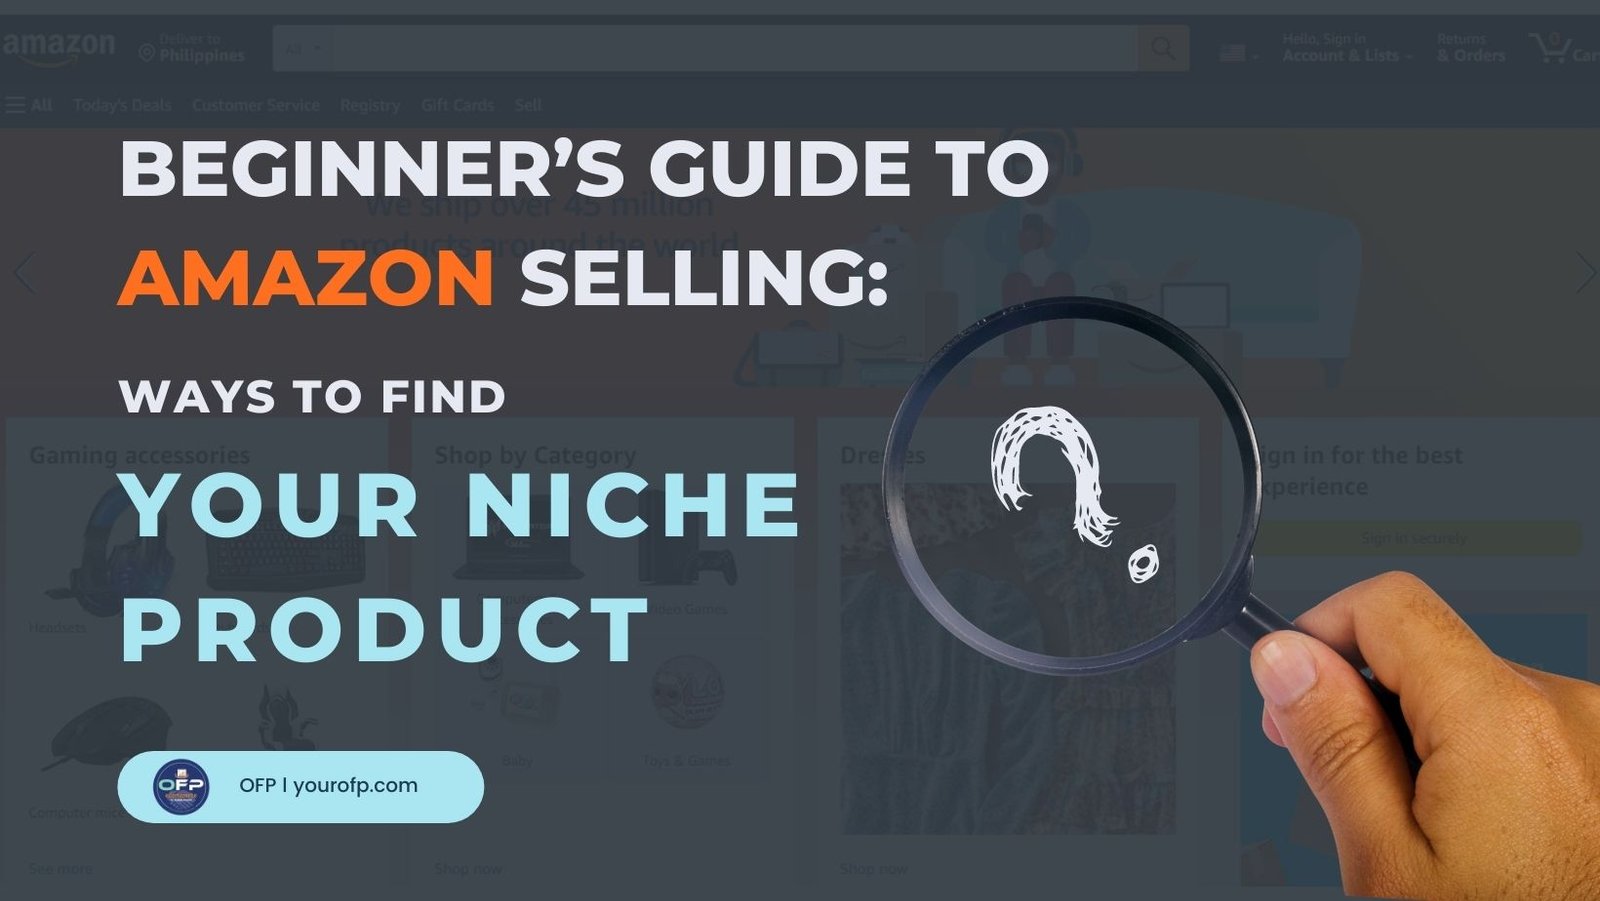 Beginner’s Guide To Amazon Selling: Ways to Find Your Niche Product